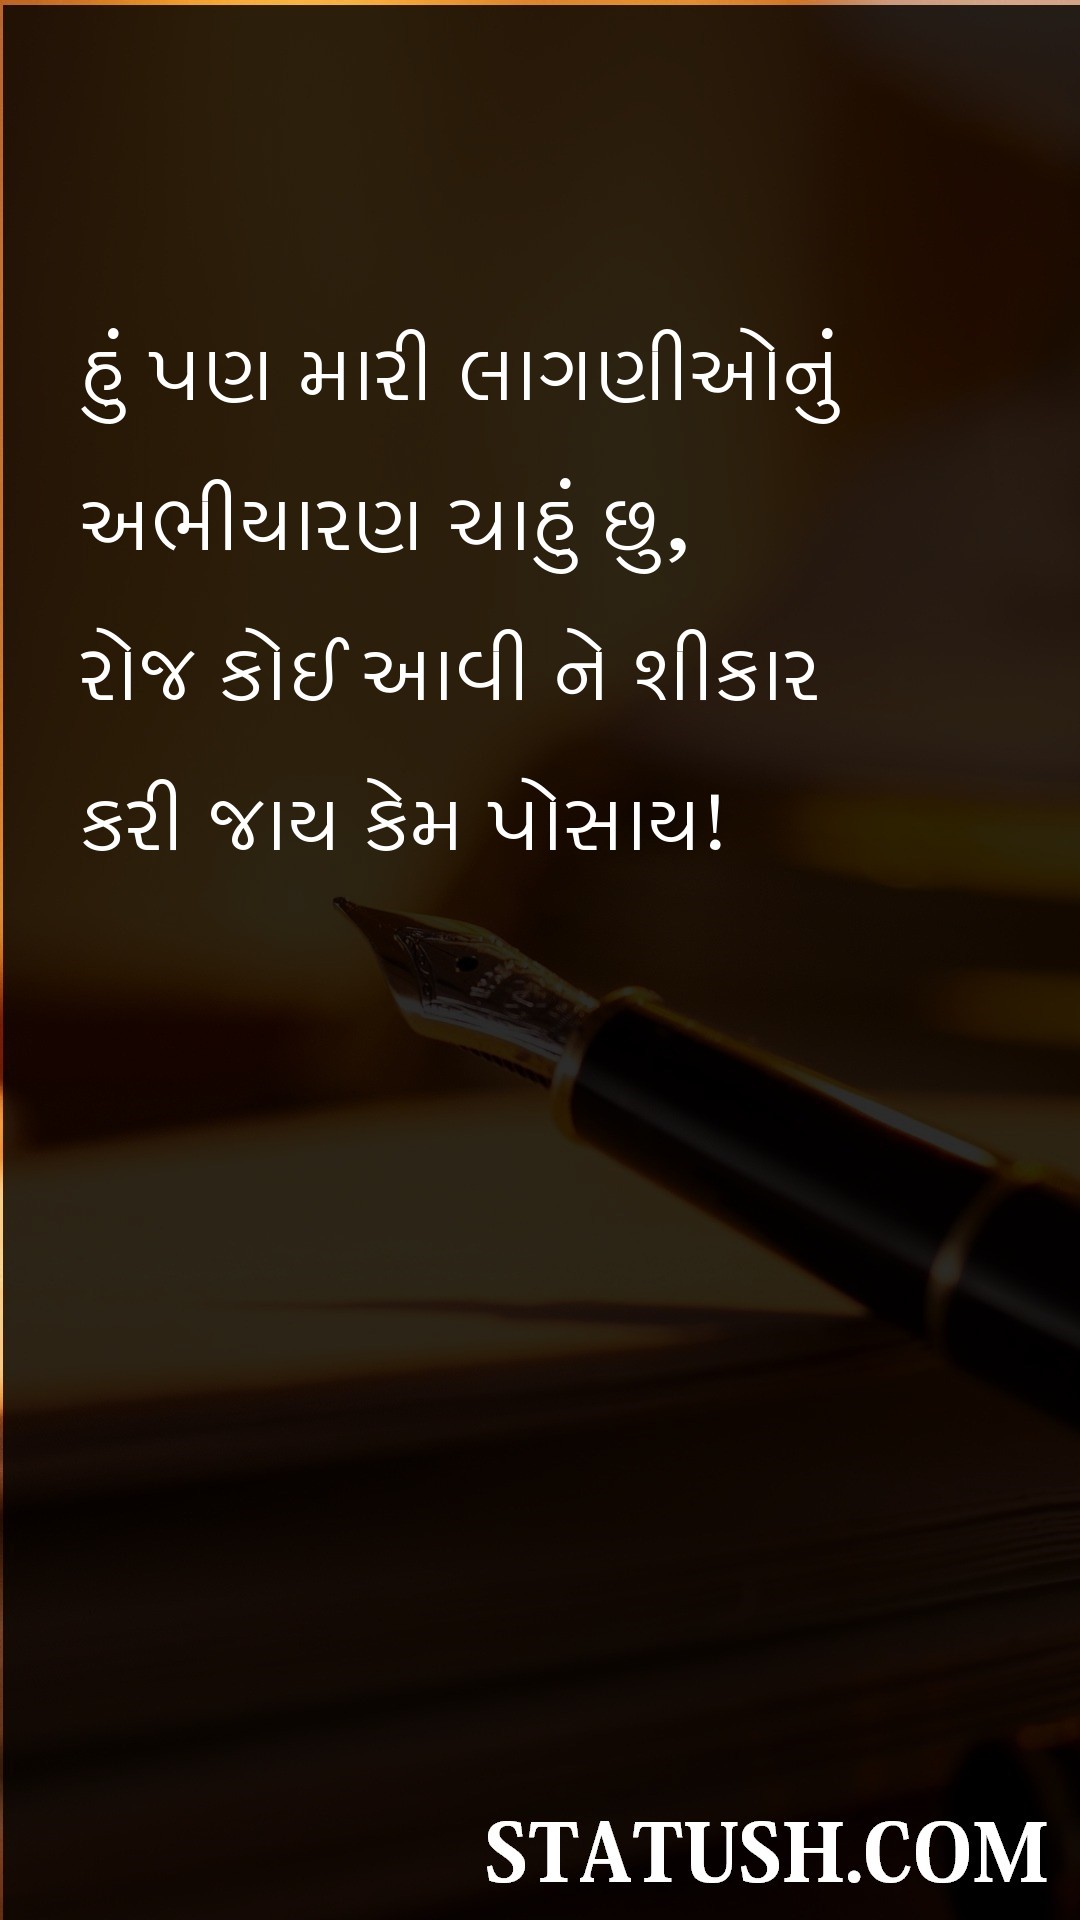 I also reserve my emotions - Gujarati Quotes at statush.com